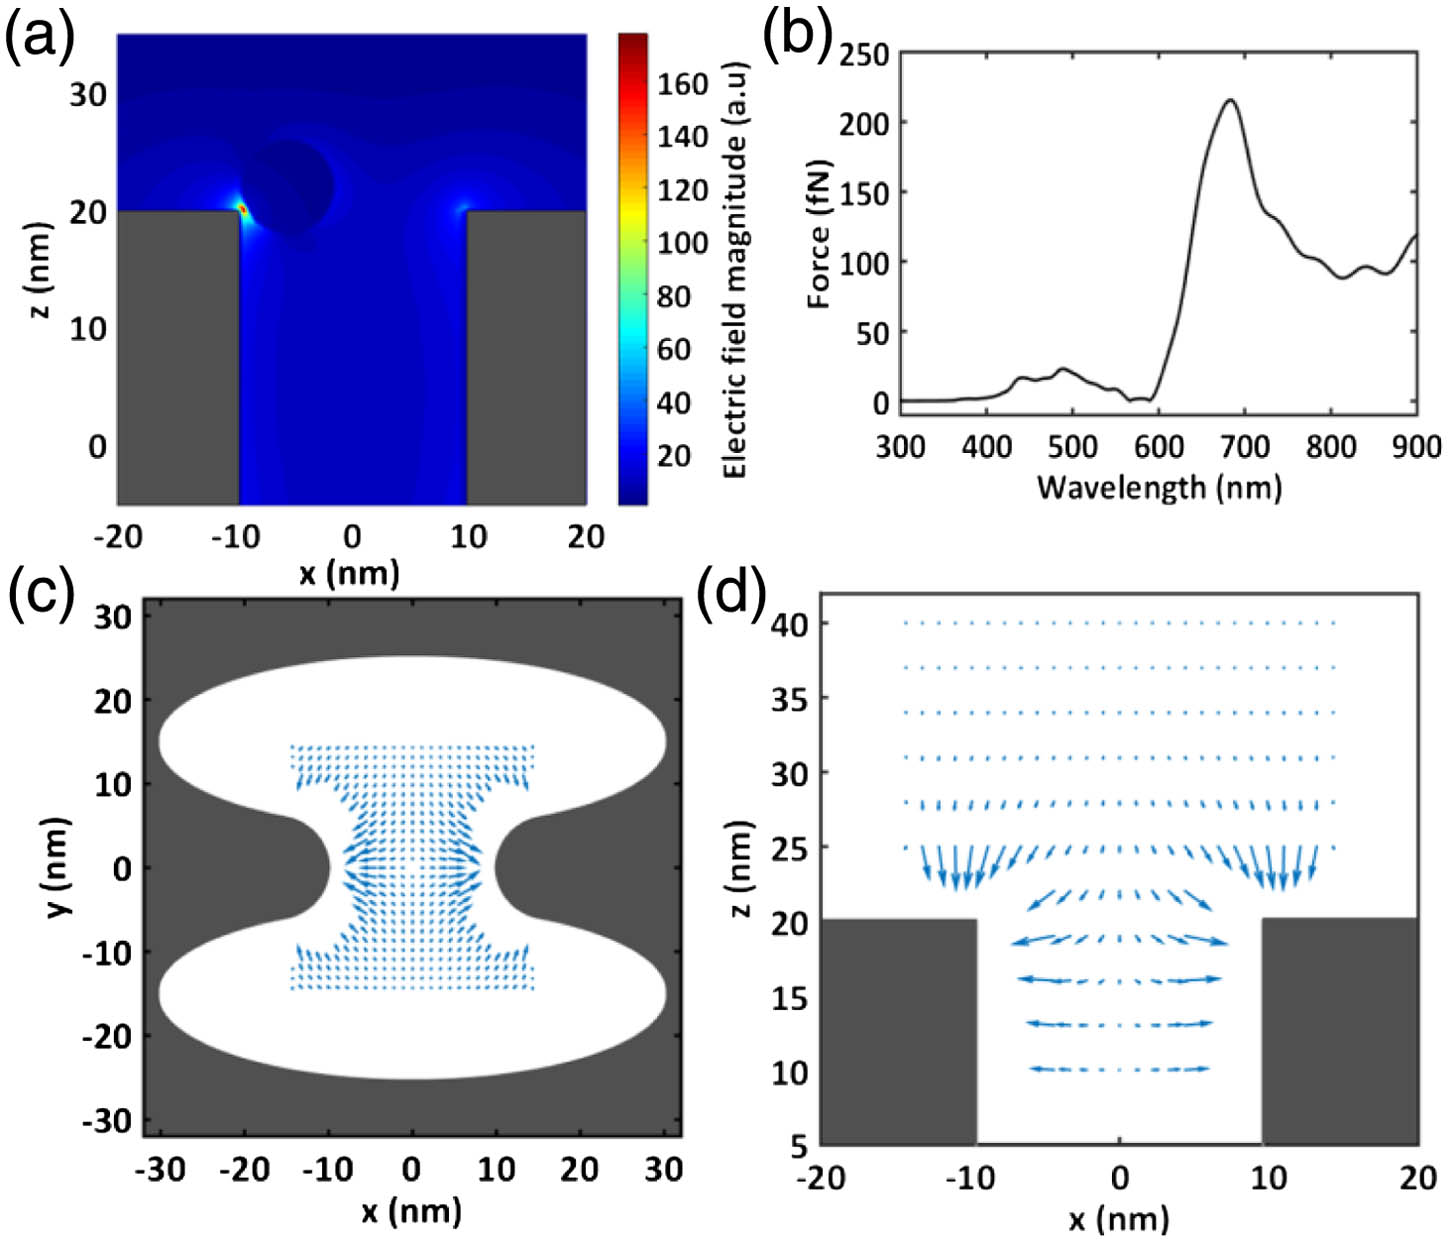 Optical force generated by the localized surface electromagnetic field. (a) Electrical field distribution of the nanocavity in the x–z plane bisecting the structure when a quantum dot is present at one of the tips. (b) Optical force on the quantum dot as a function of trapping laser wavelength. (c) Optical force vector field in the x–y plane located at the top surface of the silver patch. (d) Optical force vector field in the x–z plane bisecting the structure.